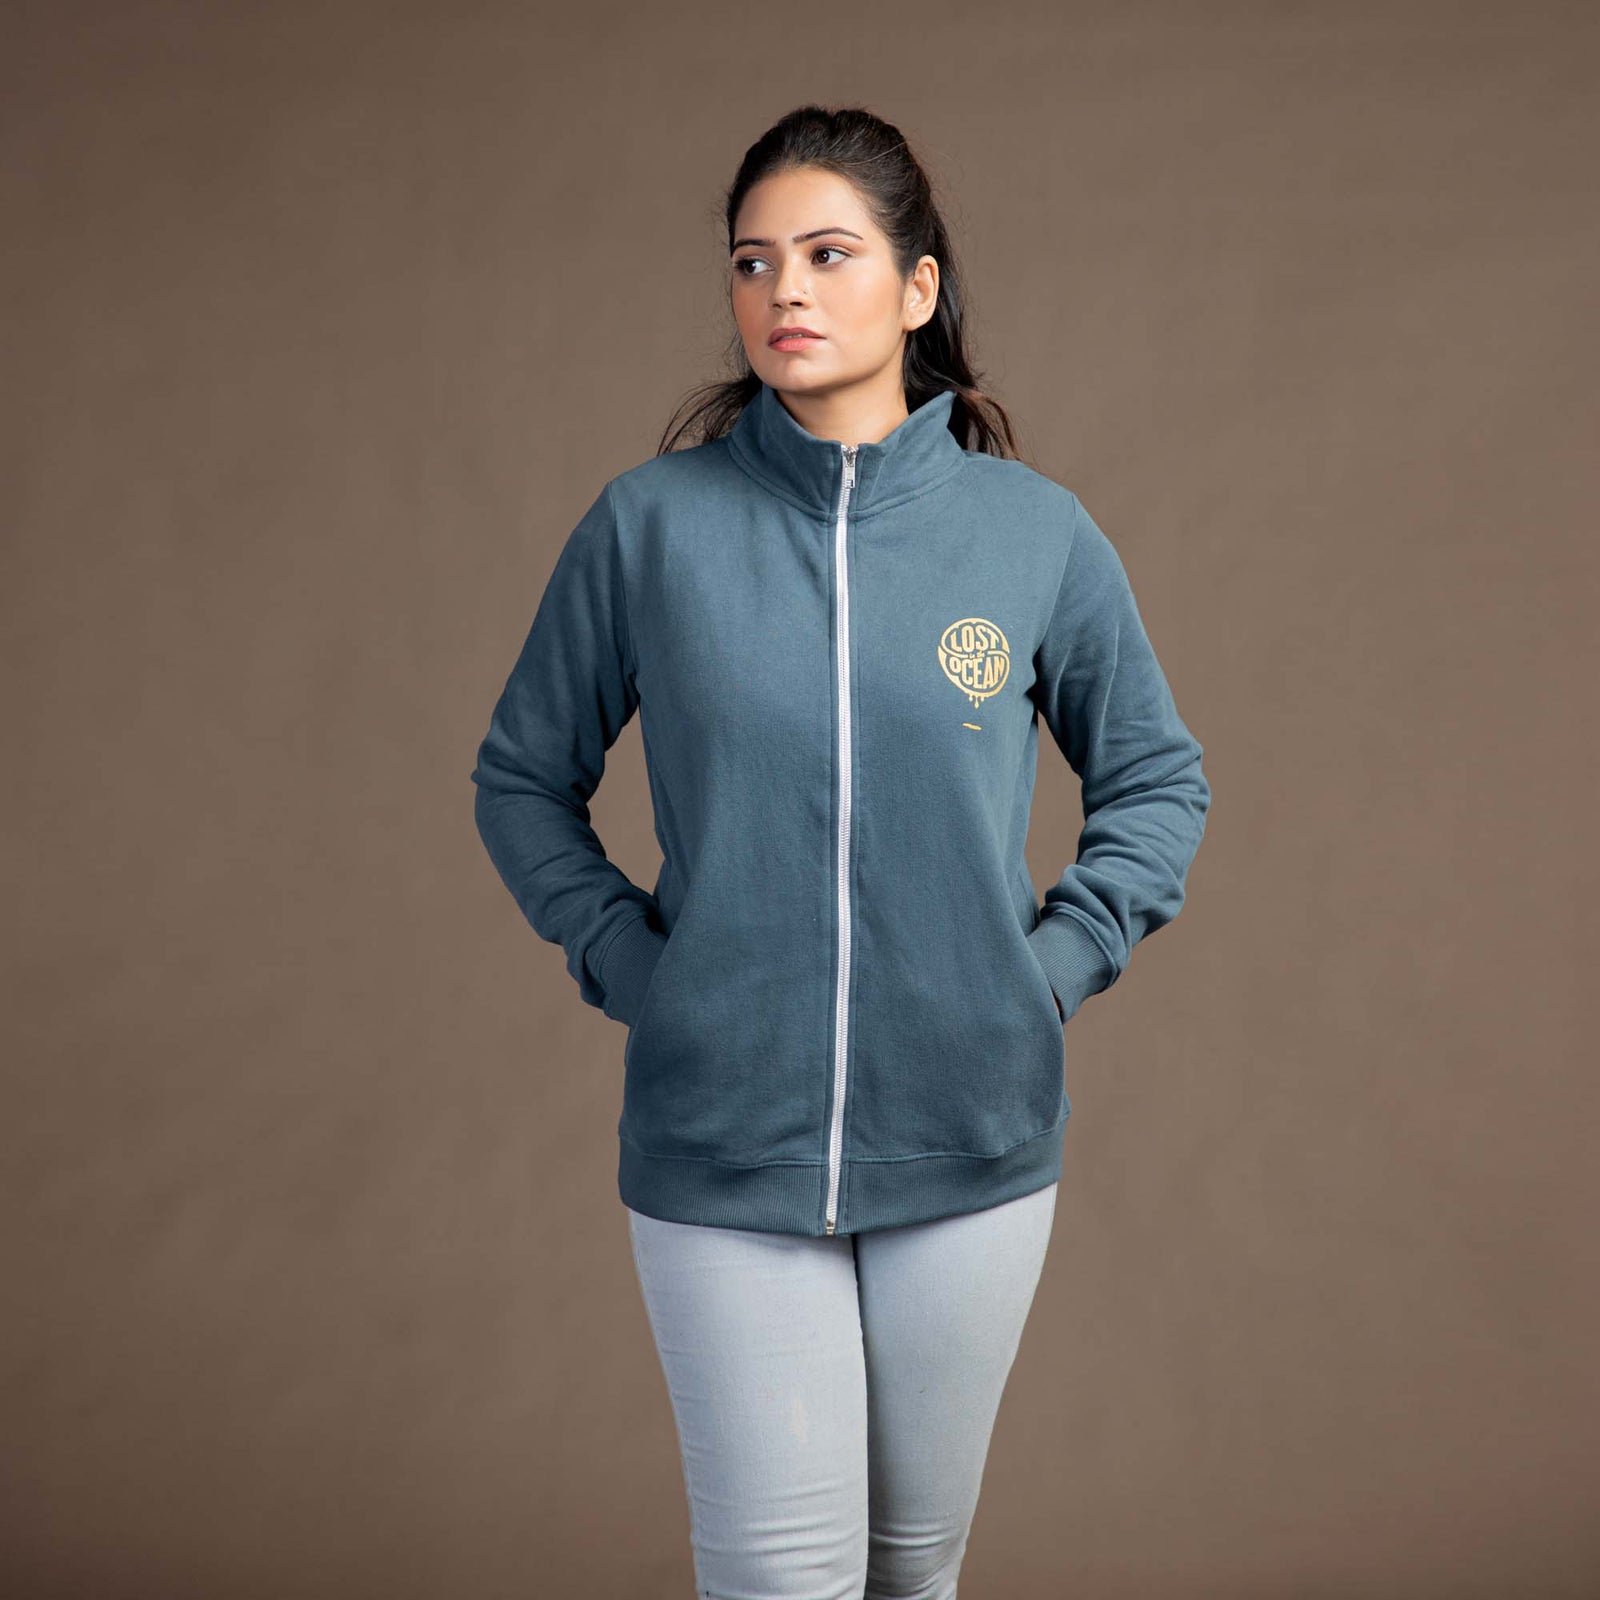 Shell V-Power Women's Hooded Zip Jacket – The Pits